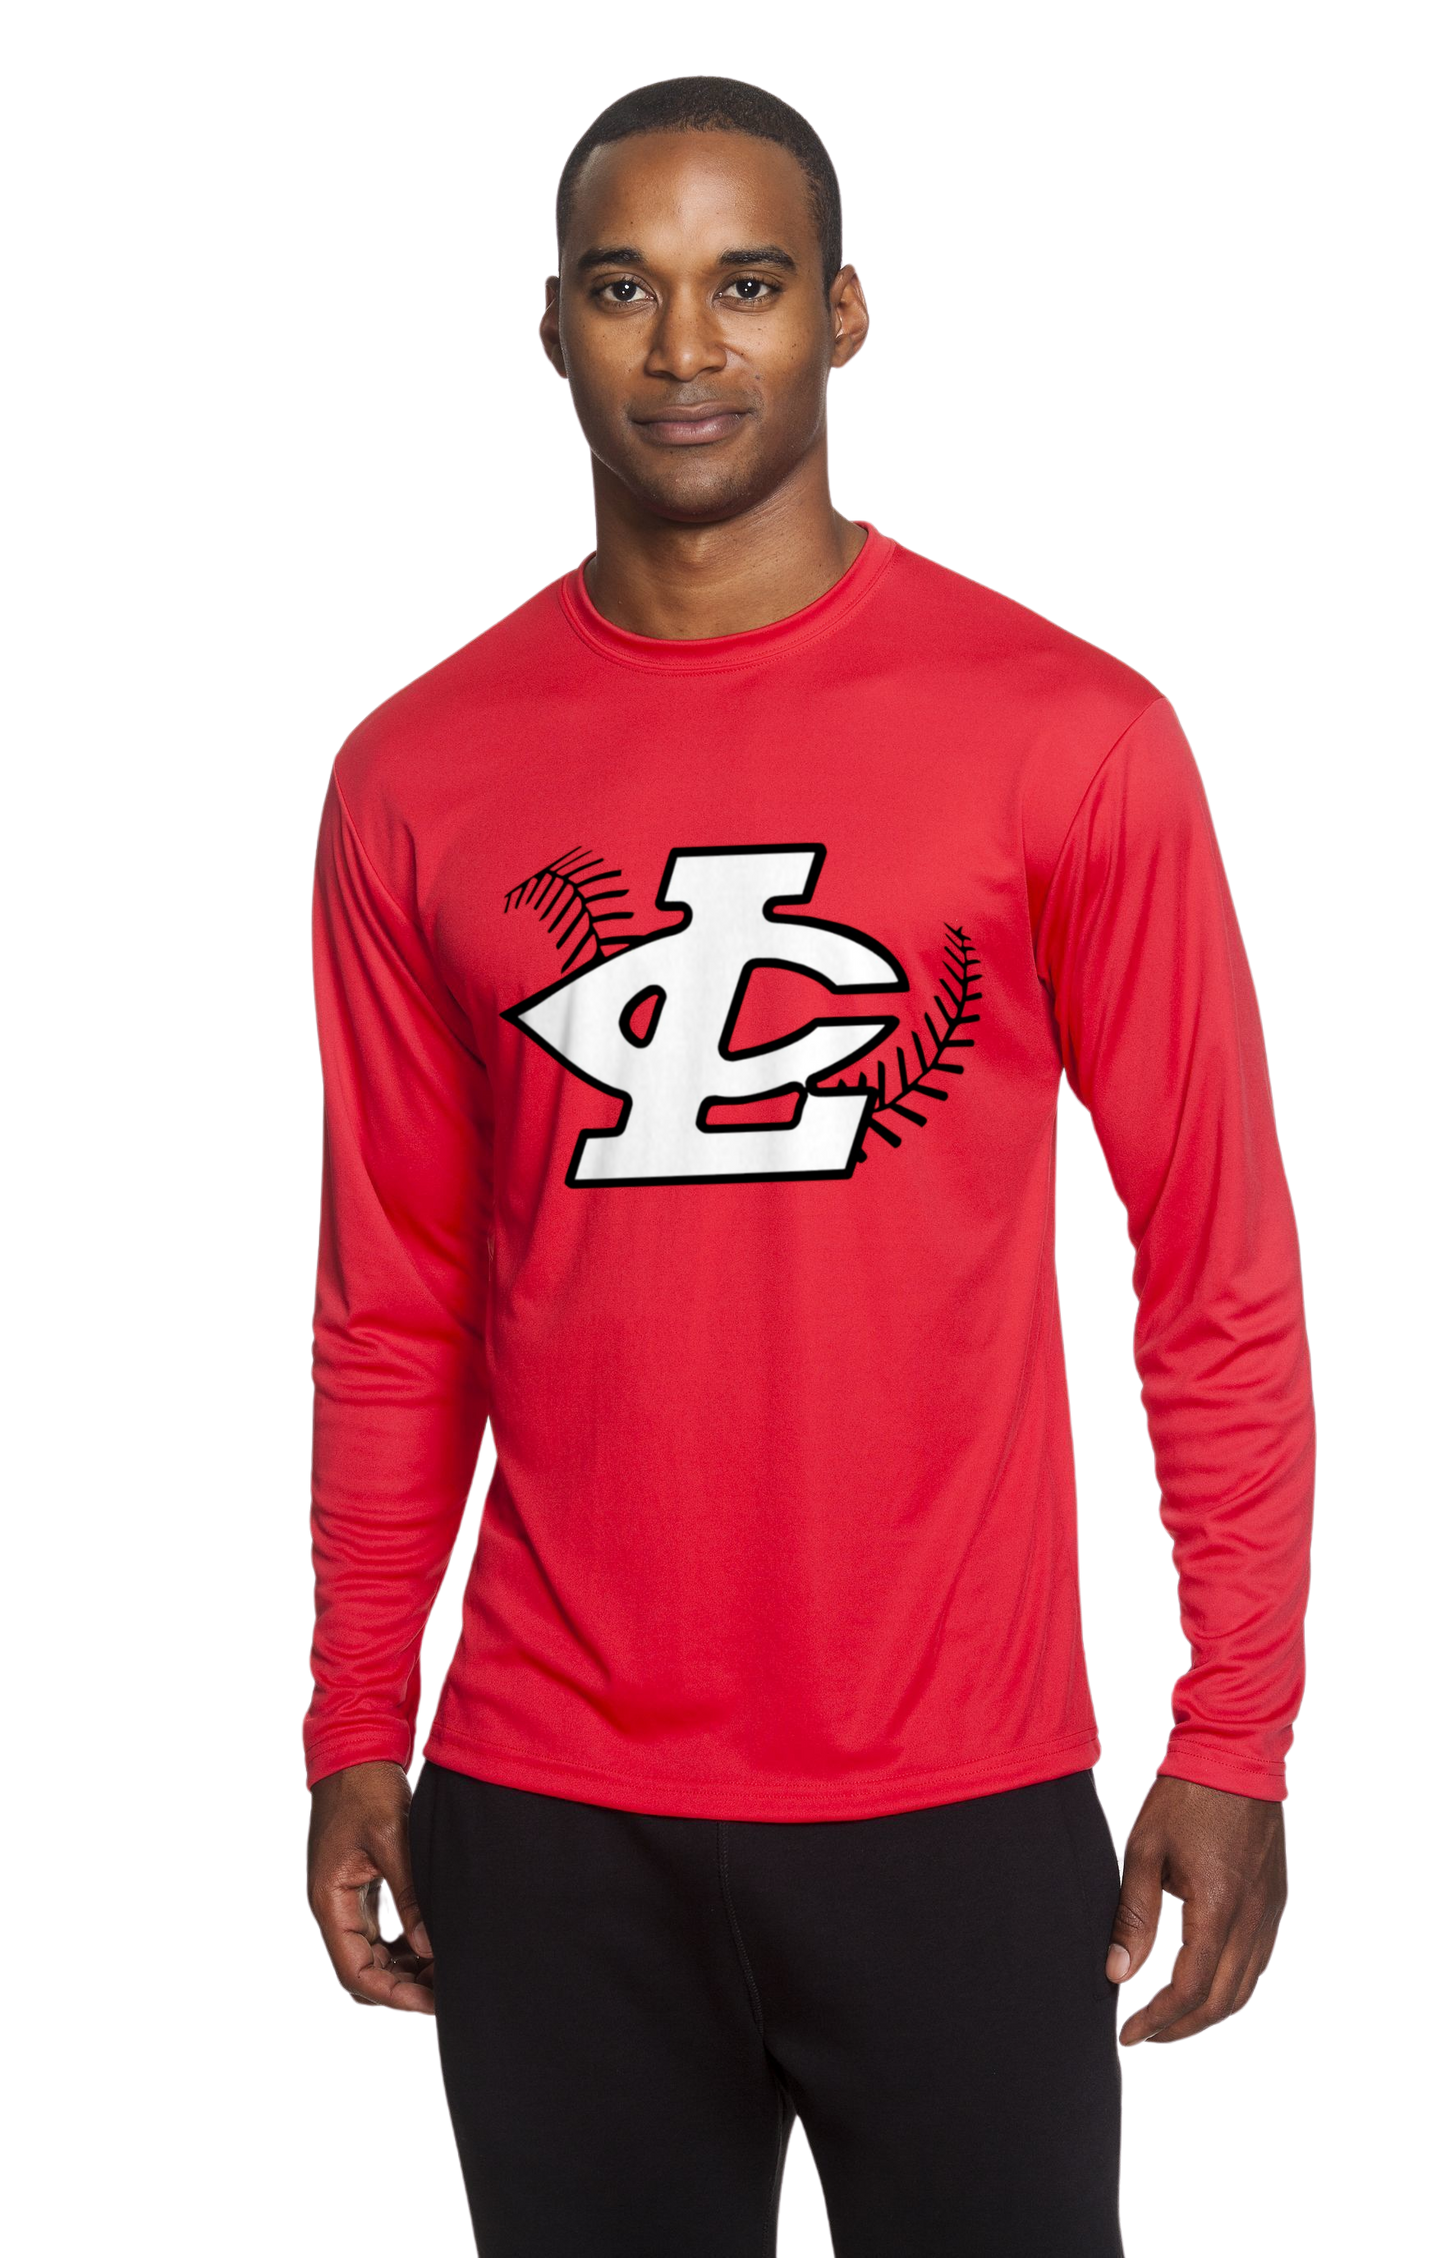 CLLL A4 Cooling Performance Long Sleeve T-Shirt RED